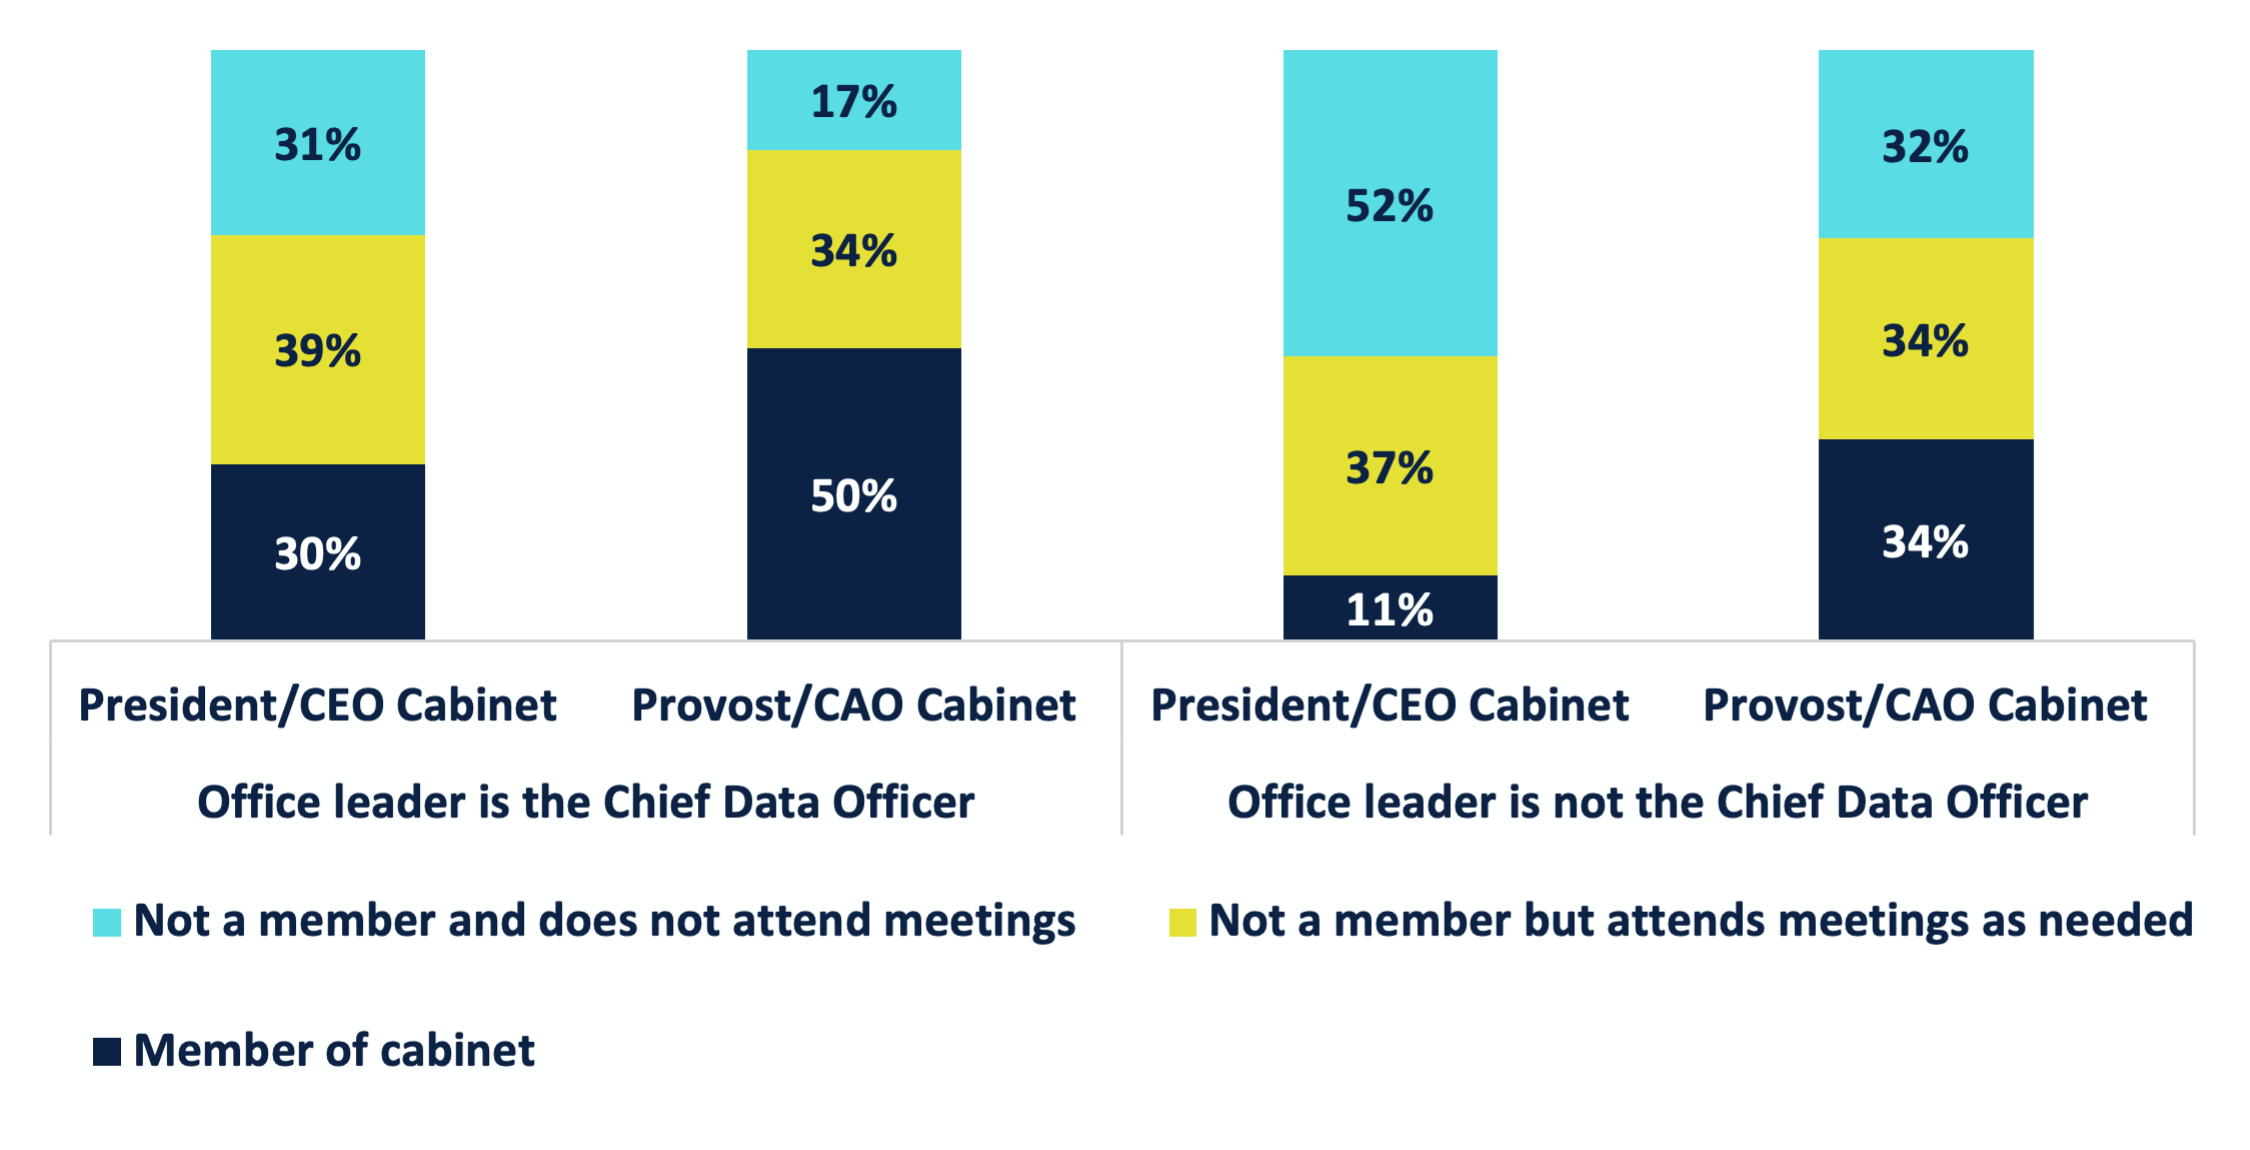 Chart 2. Relationship between IR Office Leaders, CDO Status, and Executive Cabinets